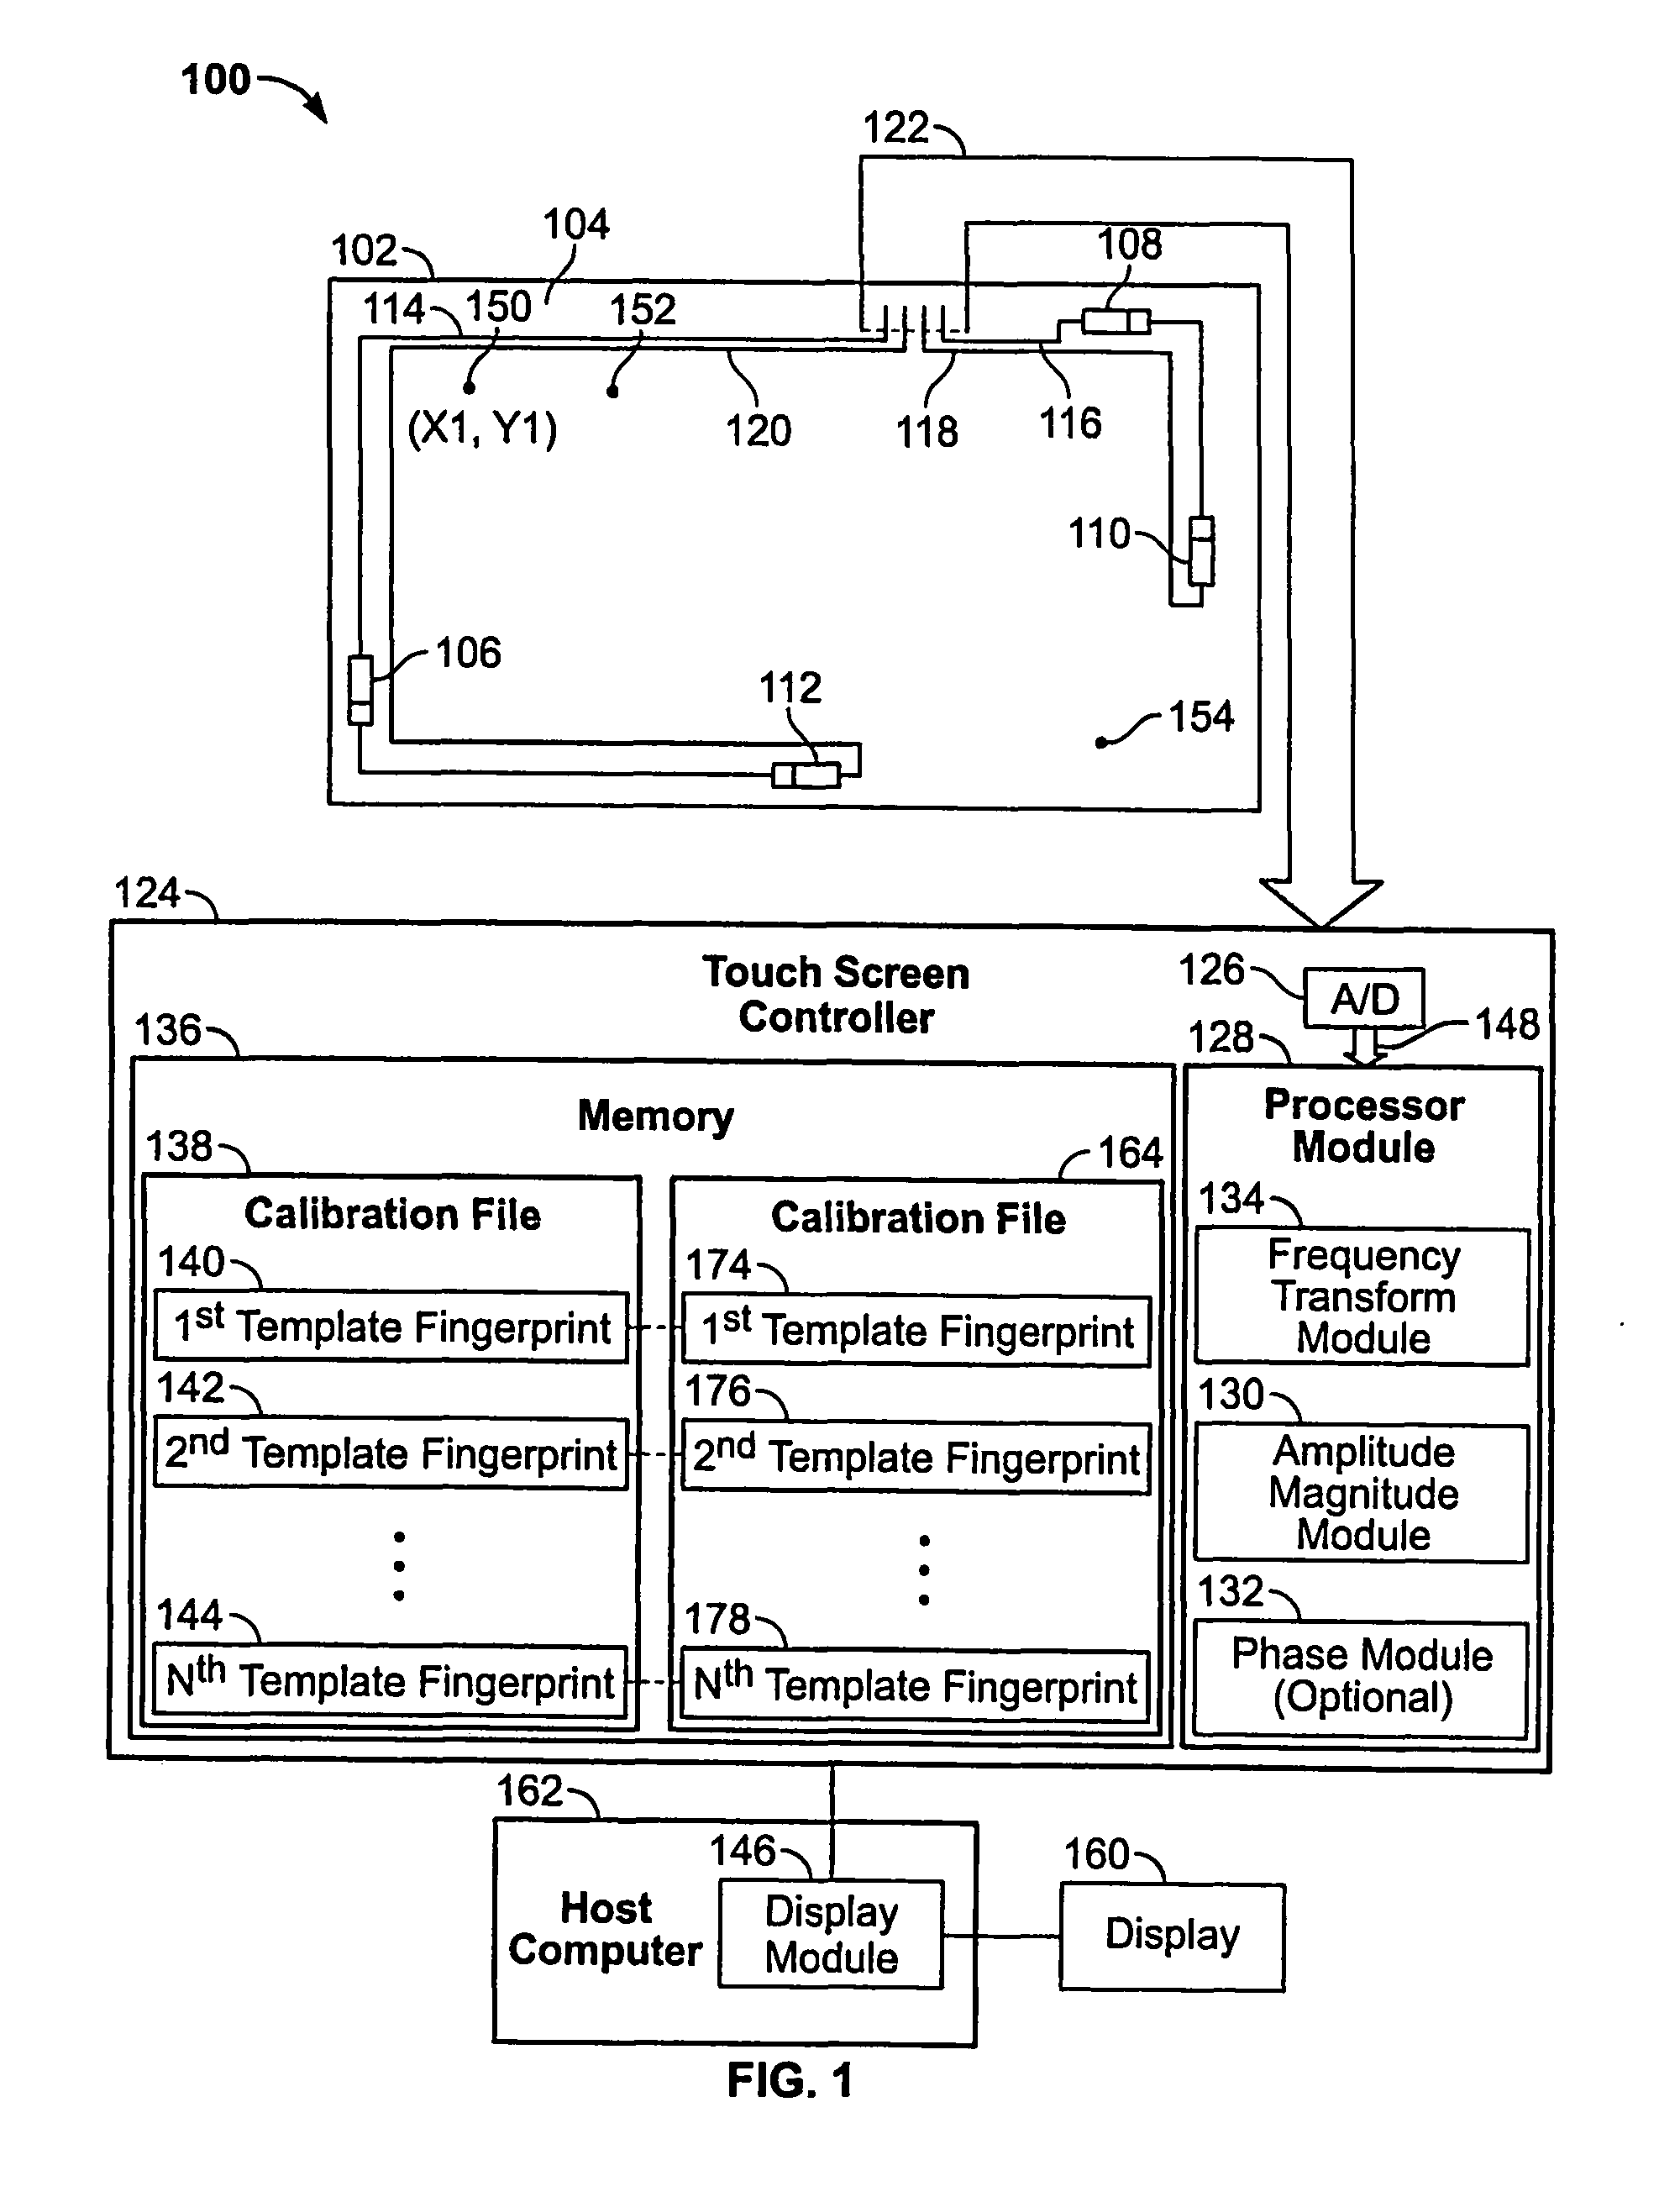 Method and system for detecting touch events based on redundant validation